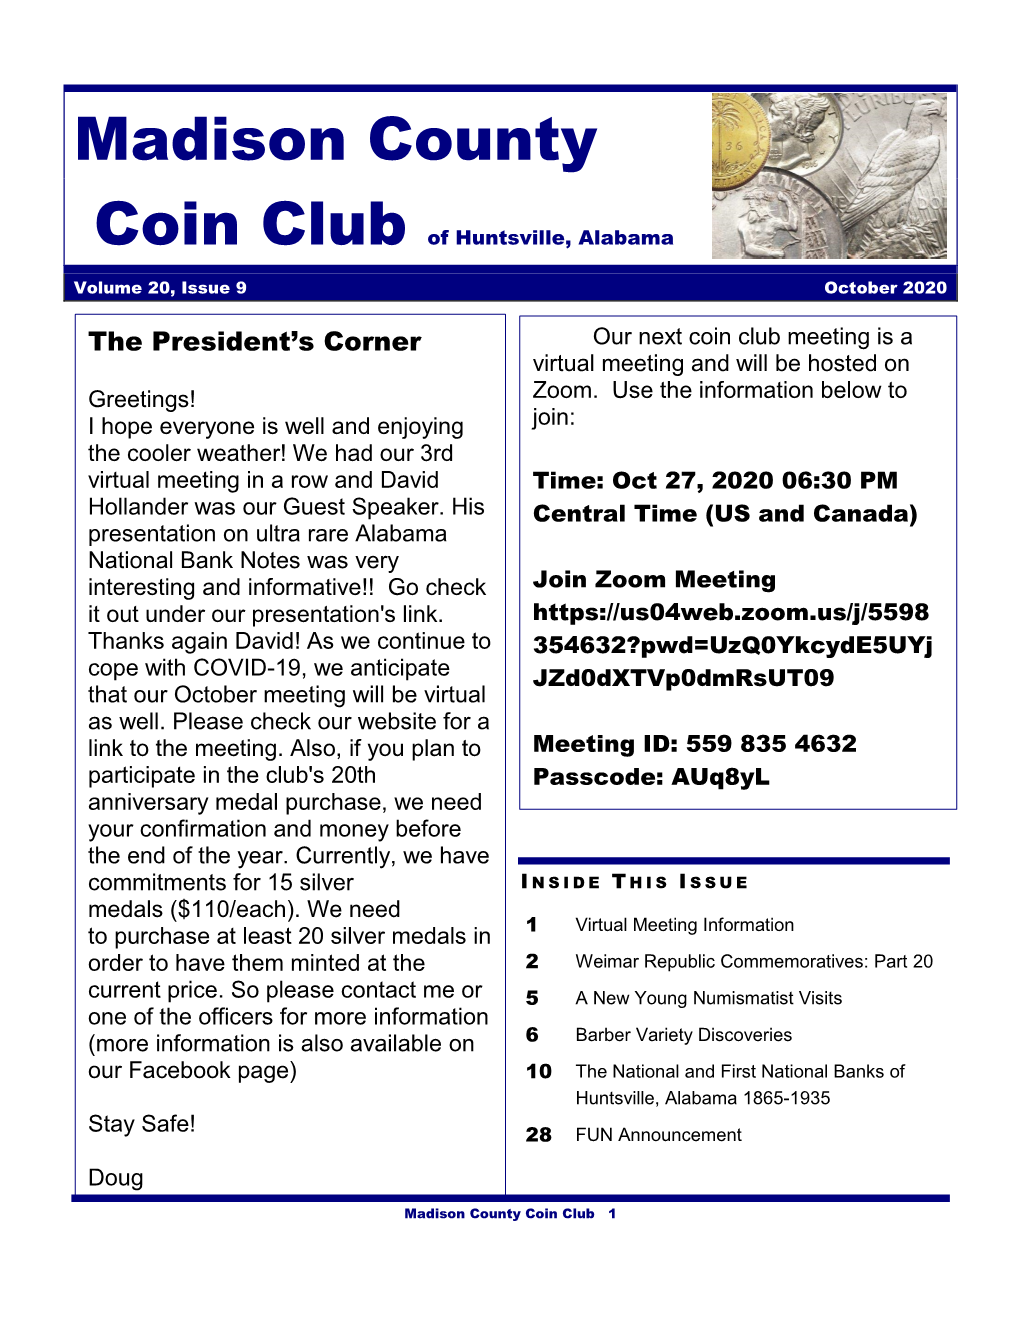 Madison County Coin Club 1